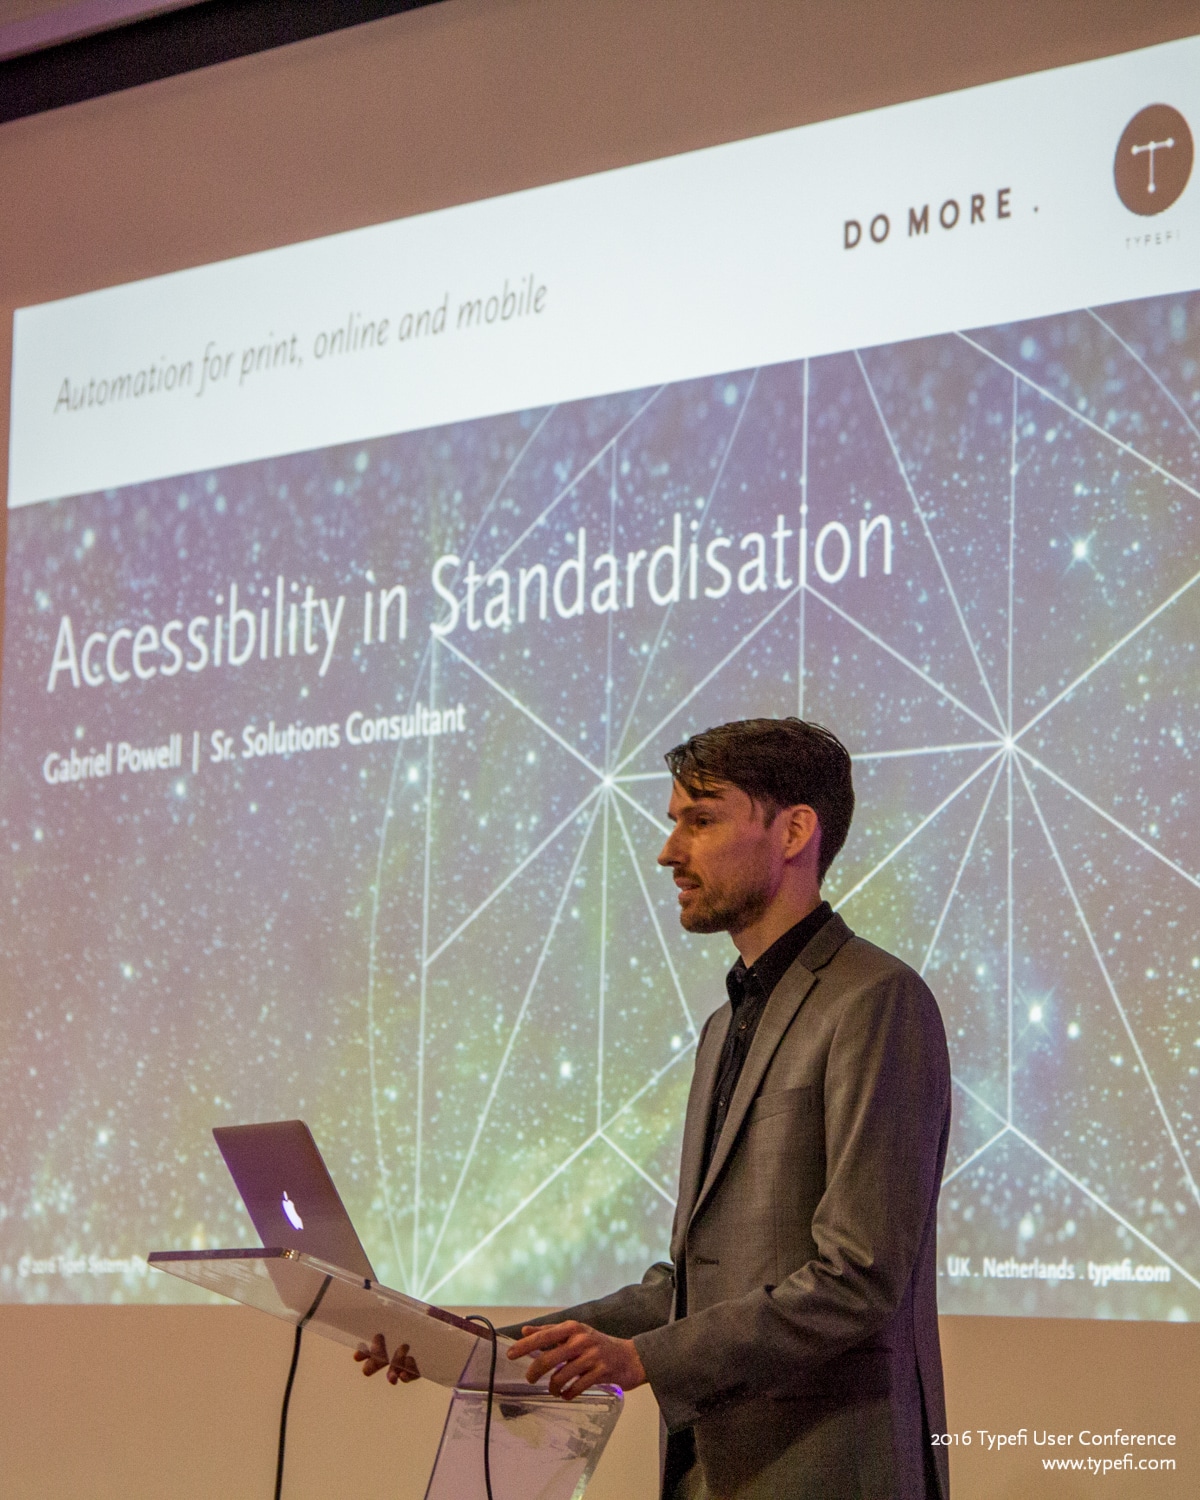 Typefi Senior Solutions Consultant Gabriel Powell presents on accessibility in standards publishing.